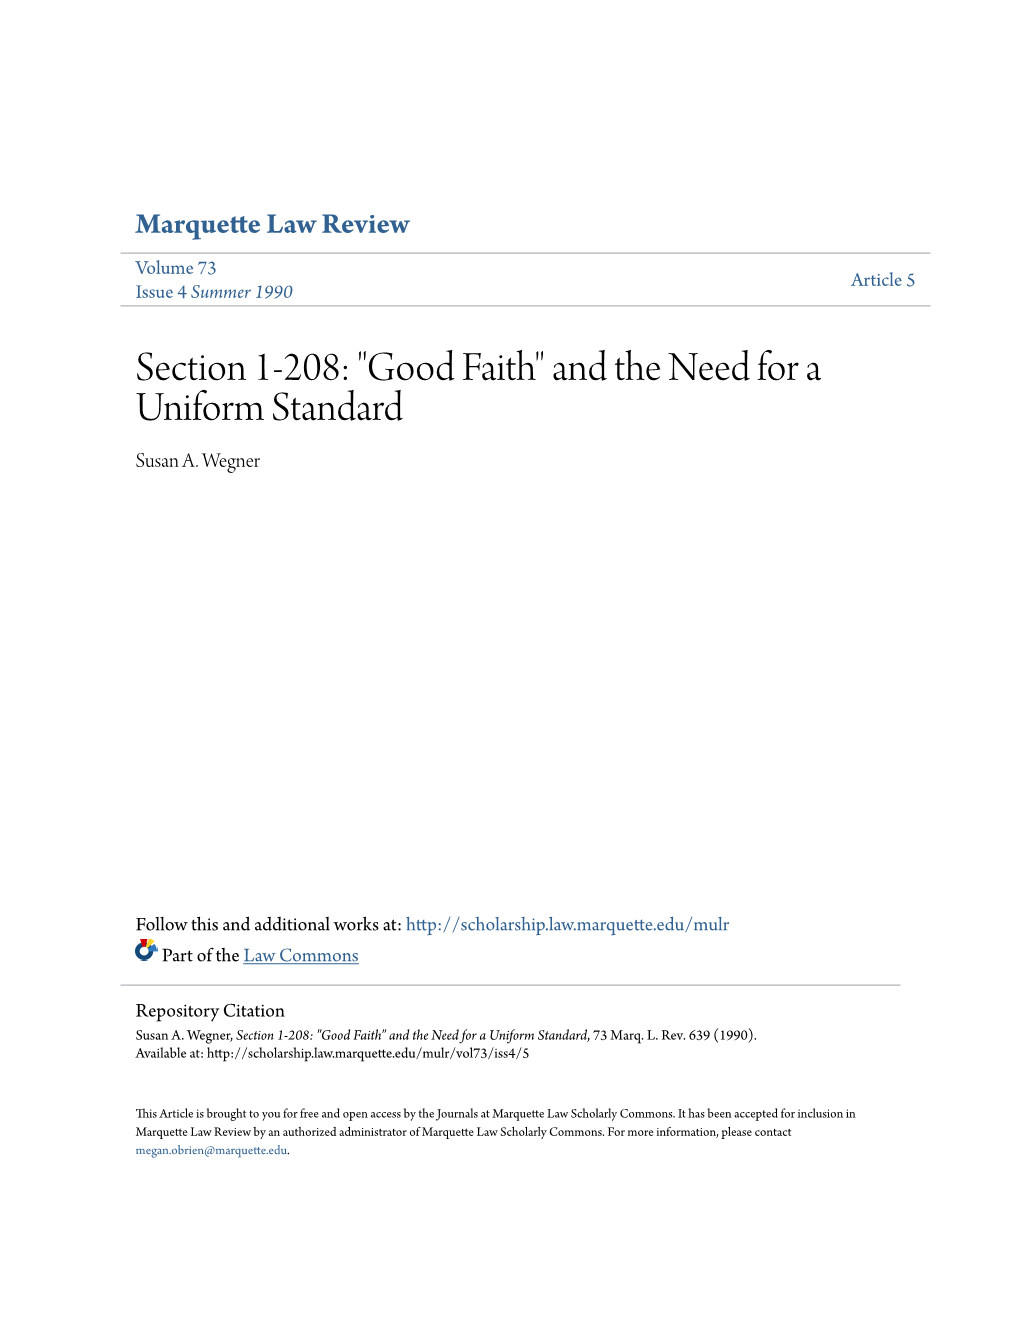 Section 1-208: "Good Faith" and the Need for a Uniform Standard Susan A